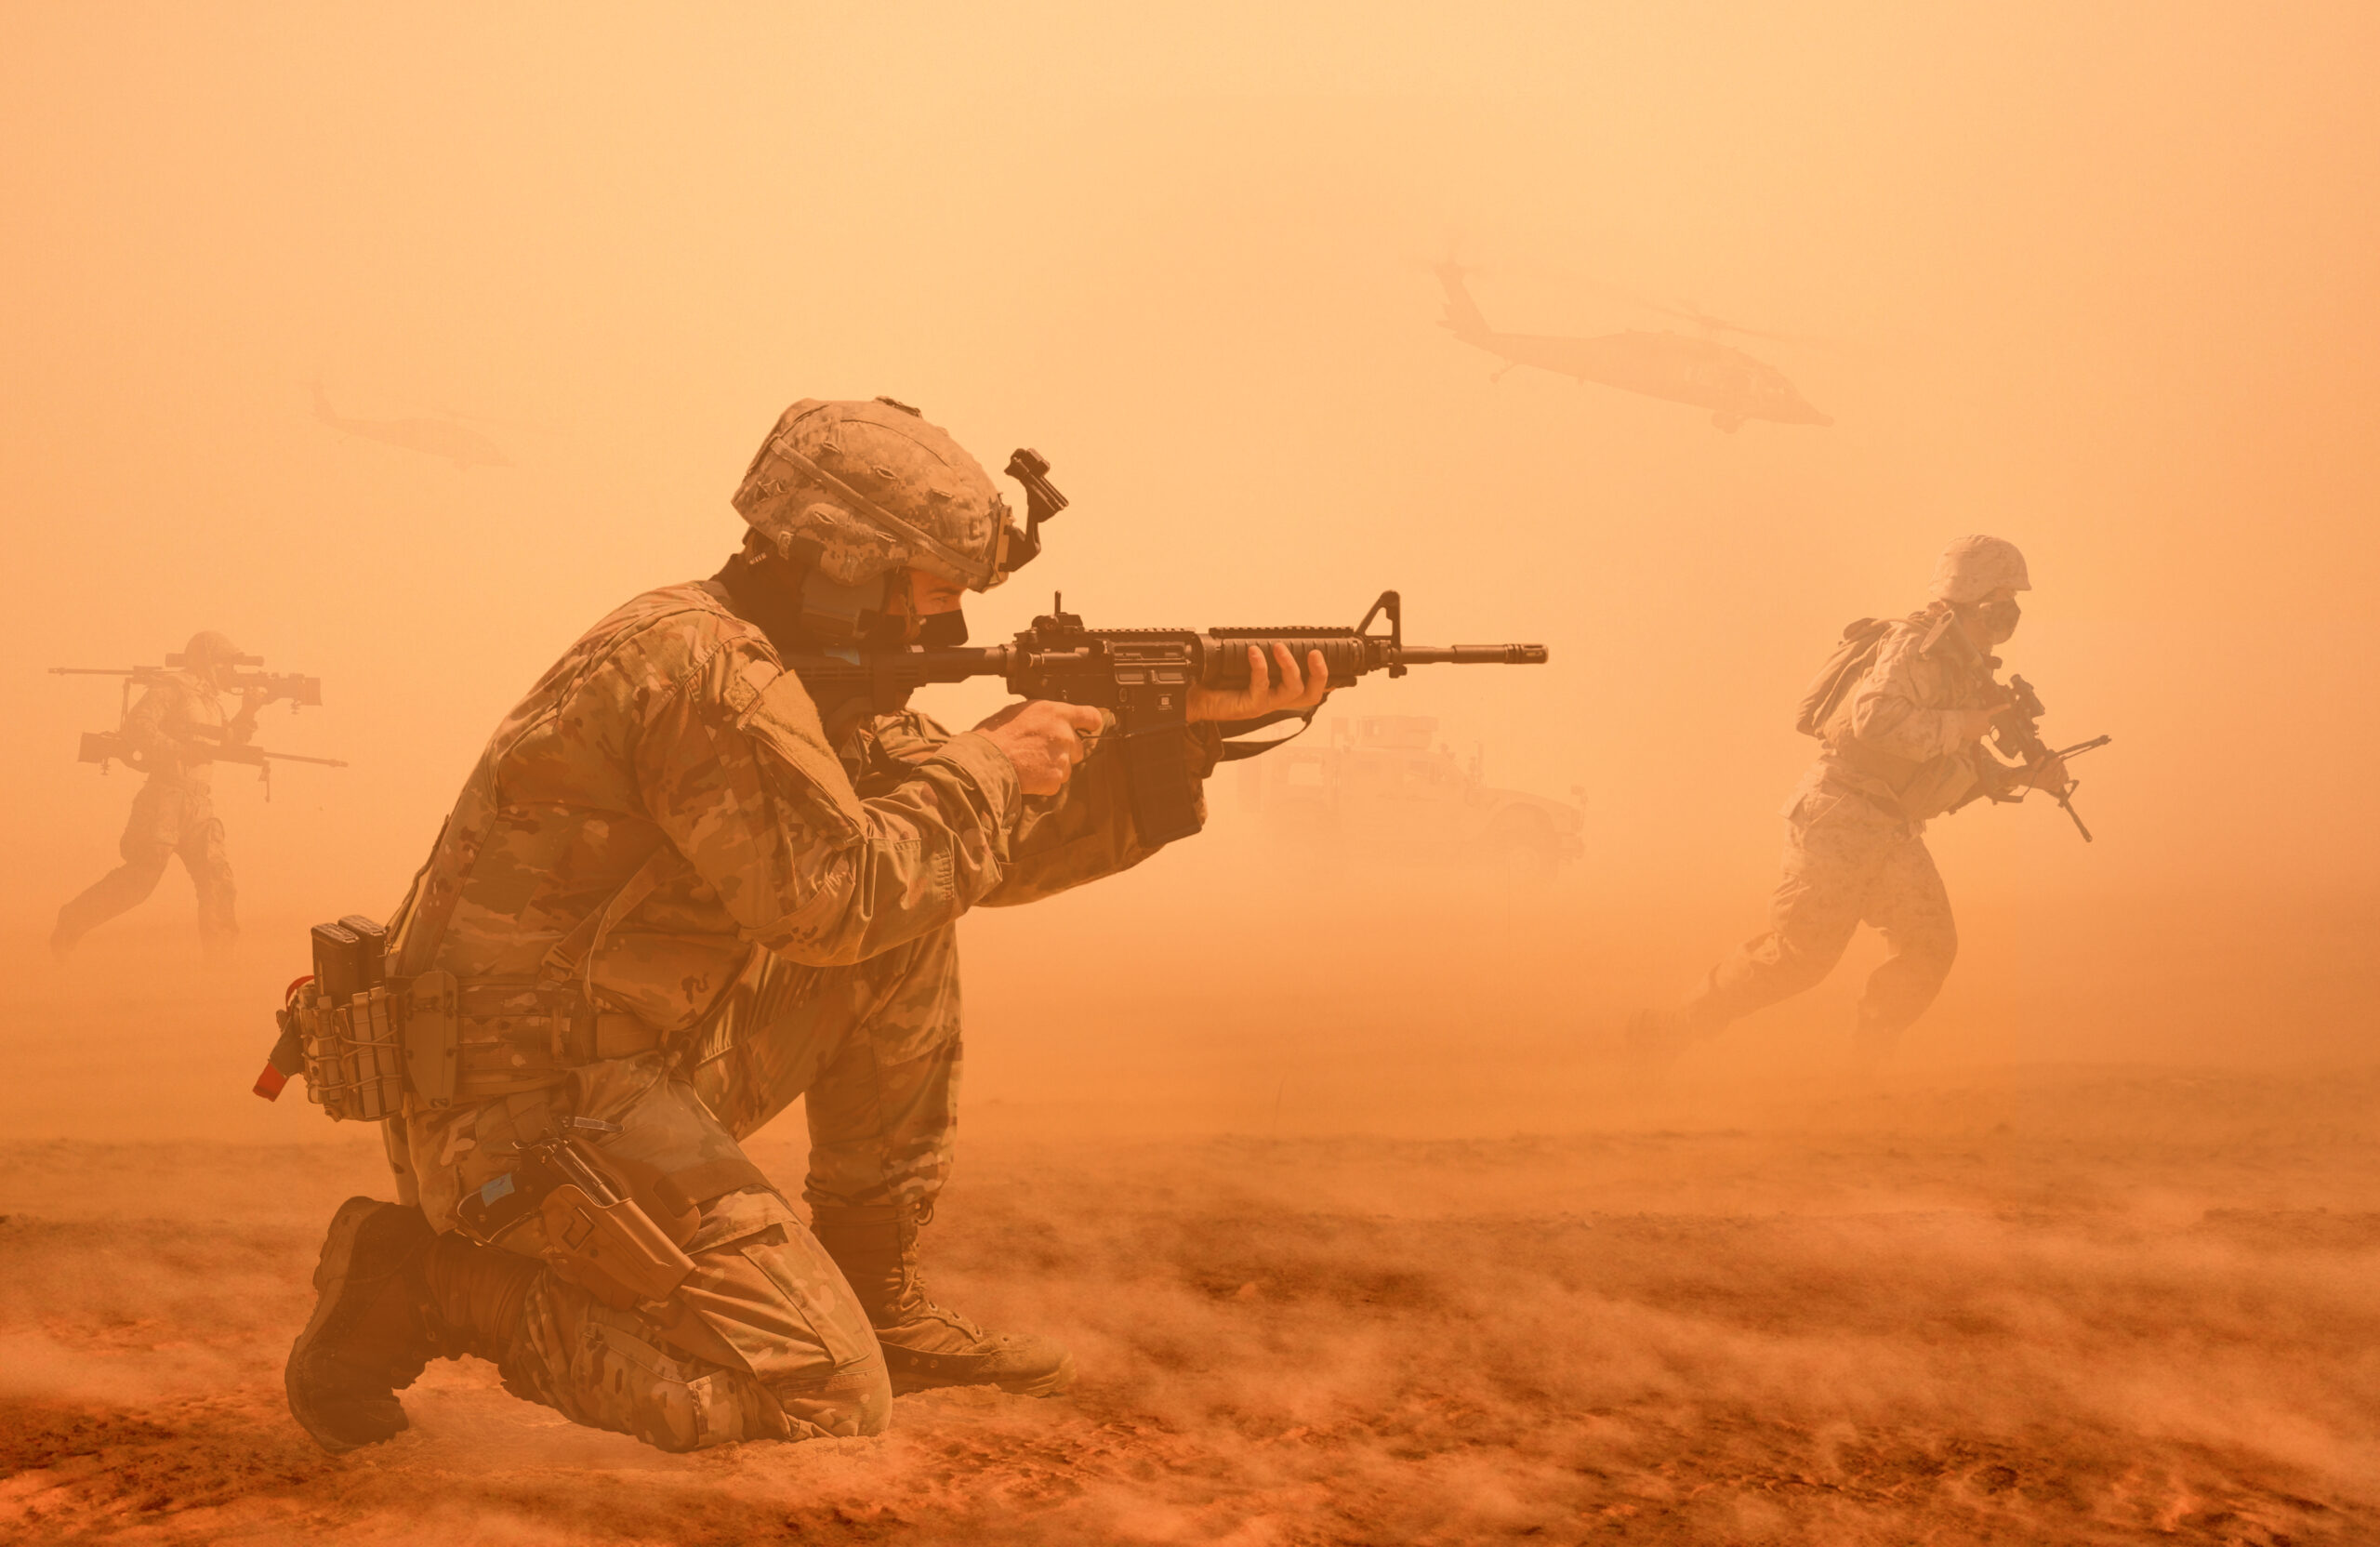 Soldiers in the desert